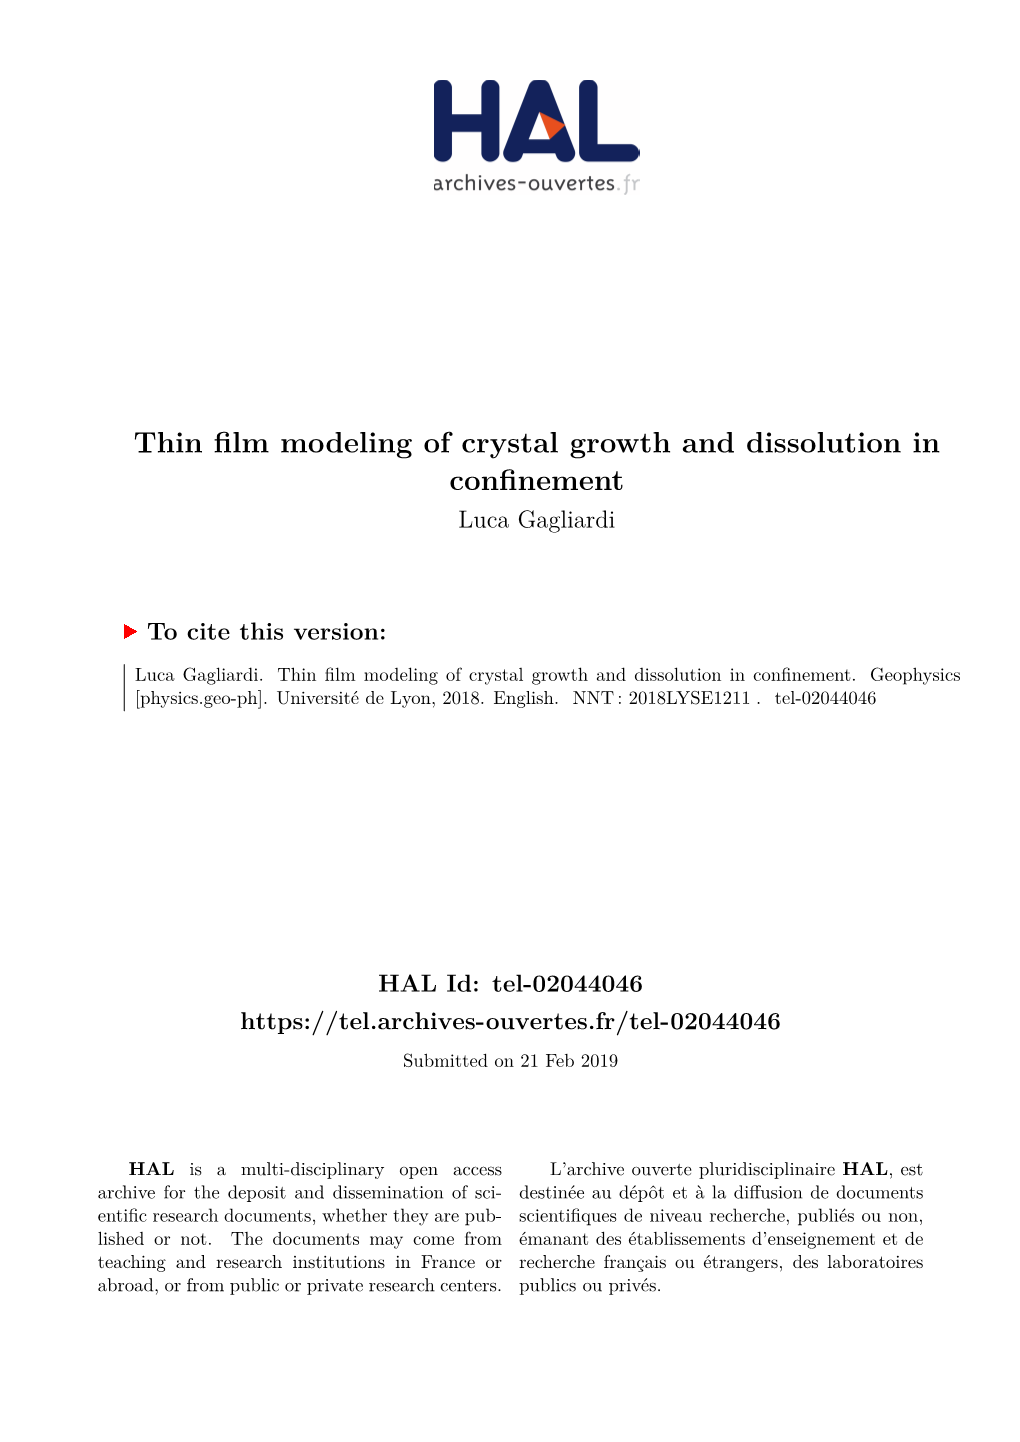 Thin Film Modeling of Crystal Growth and Dissolution in Confinement Luca Gagliardi